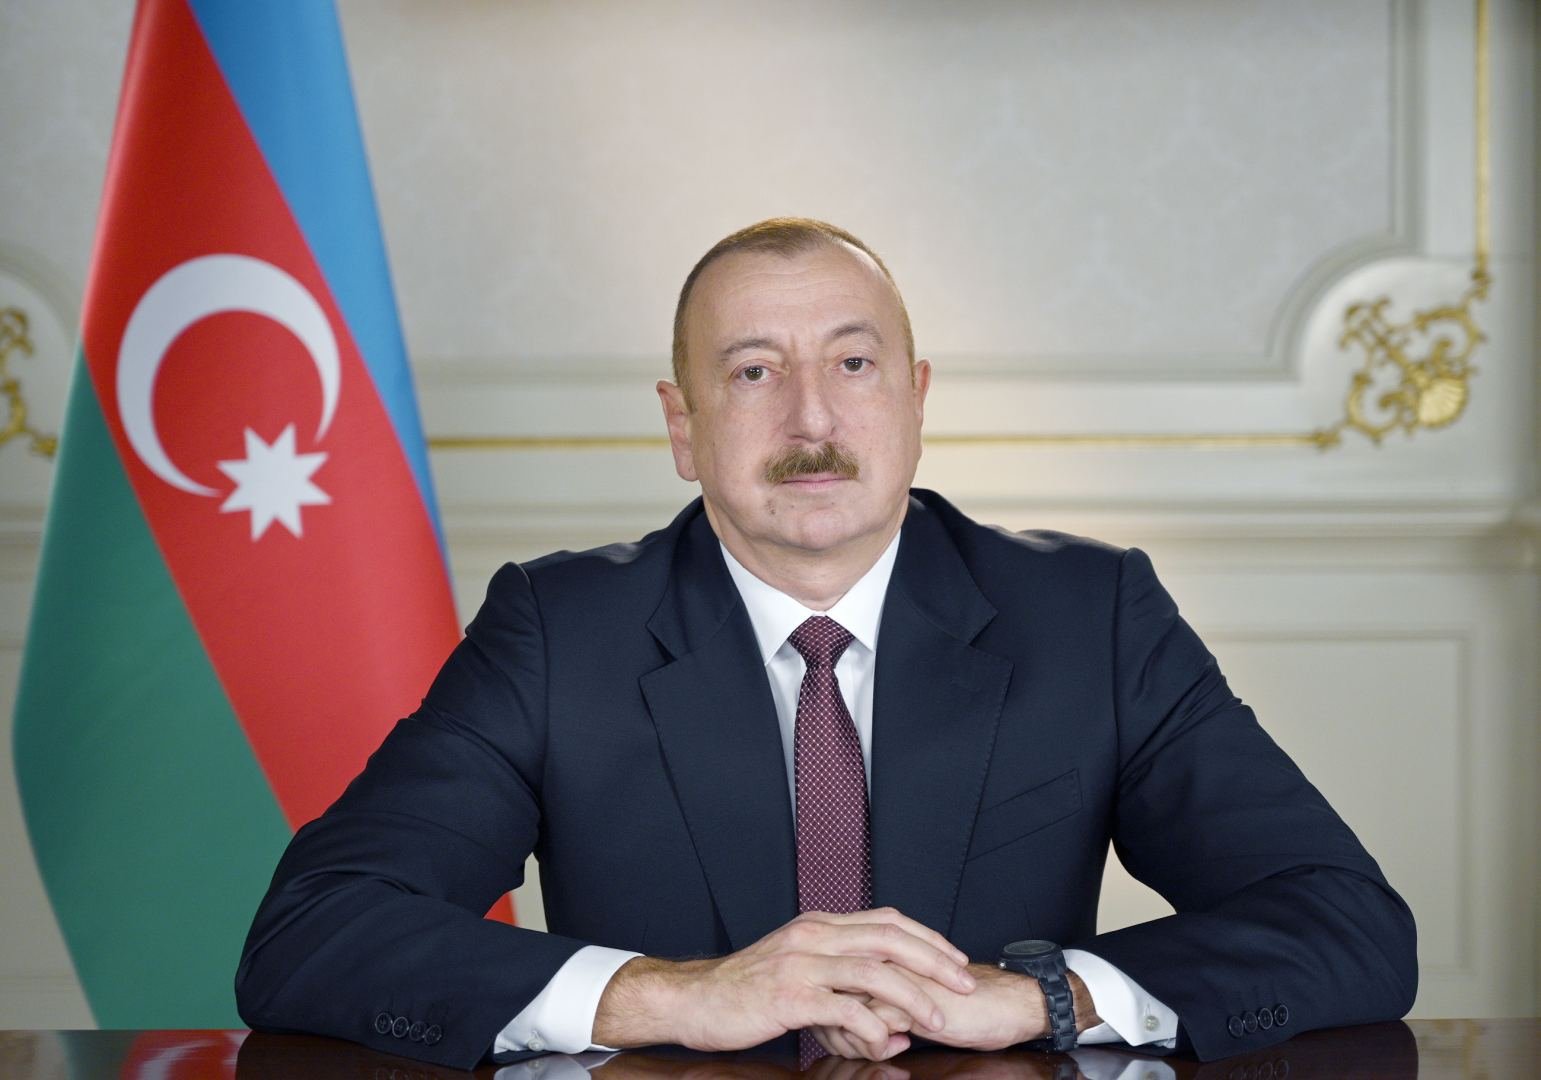 Blood of our martyrs did not remain unavenged, we have avenged blood of our martyrs – President Ilham Aliyev